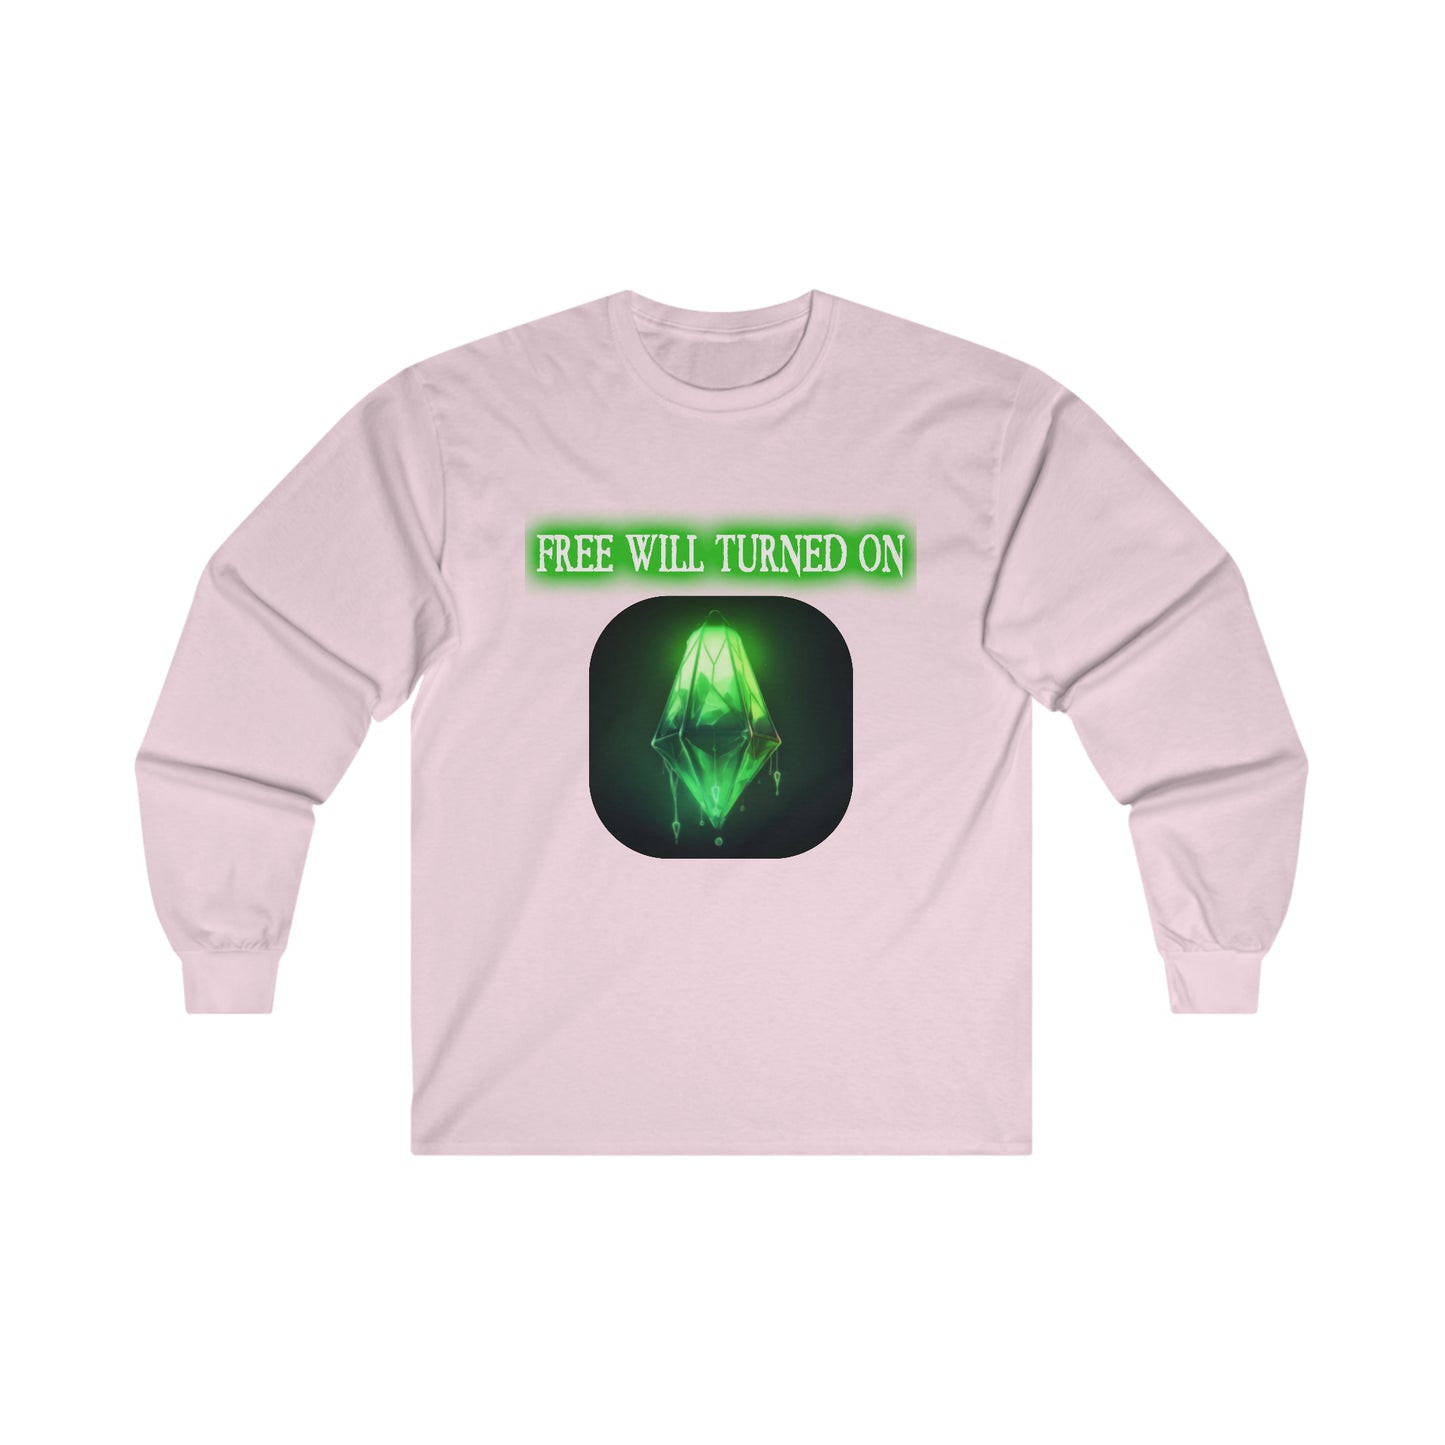 Free Will Turned On - Ultra Cotton Long Sleeve Tee